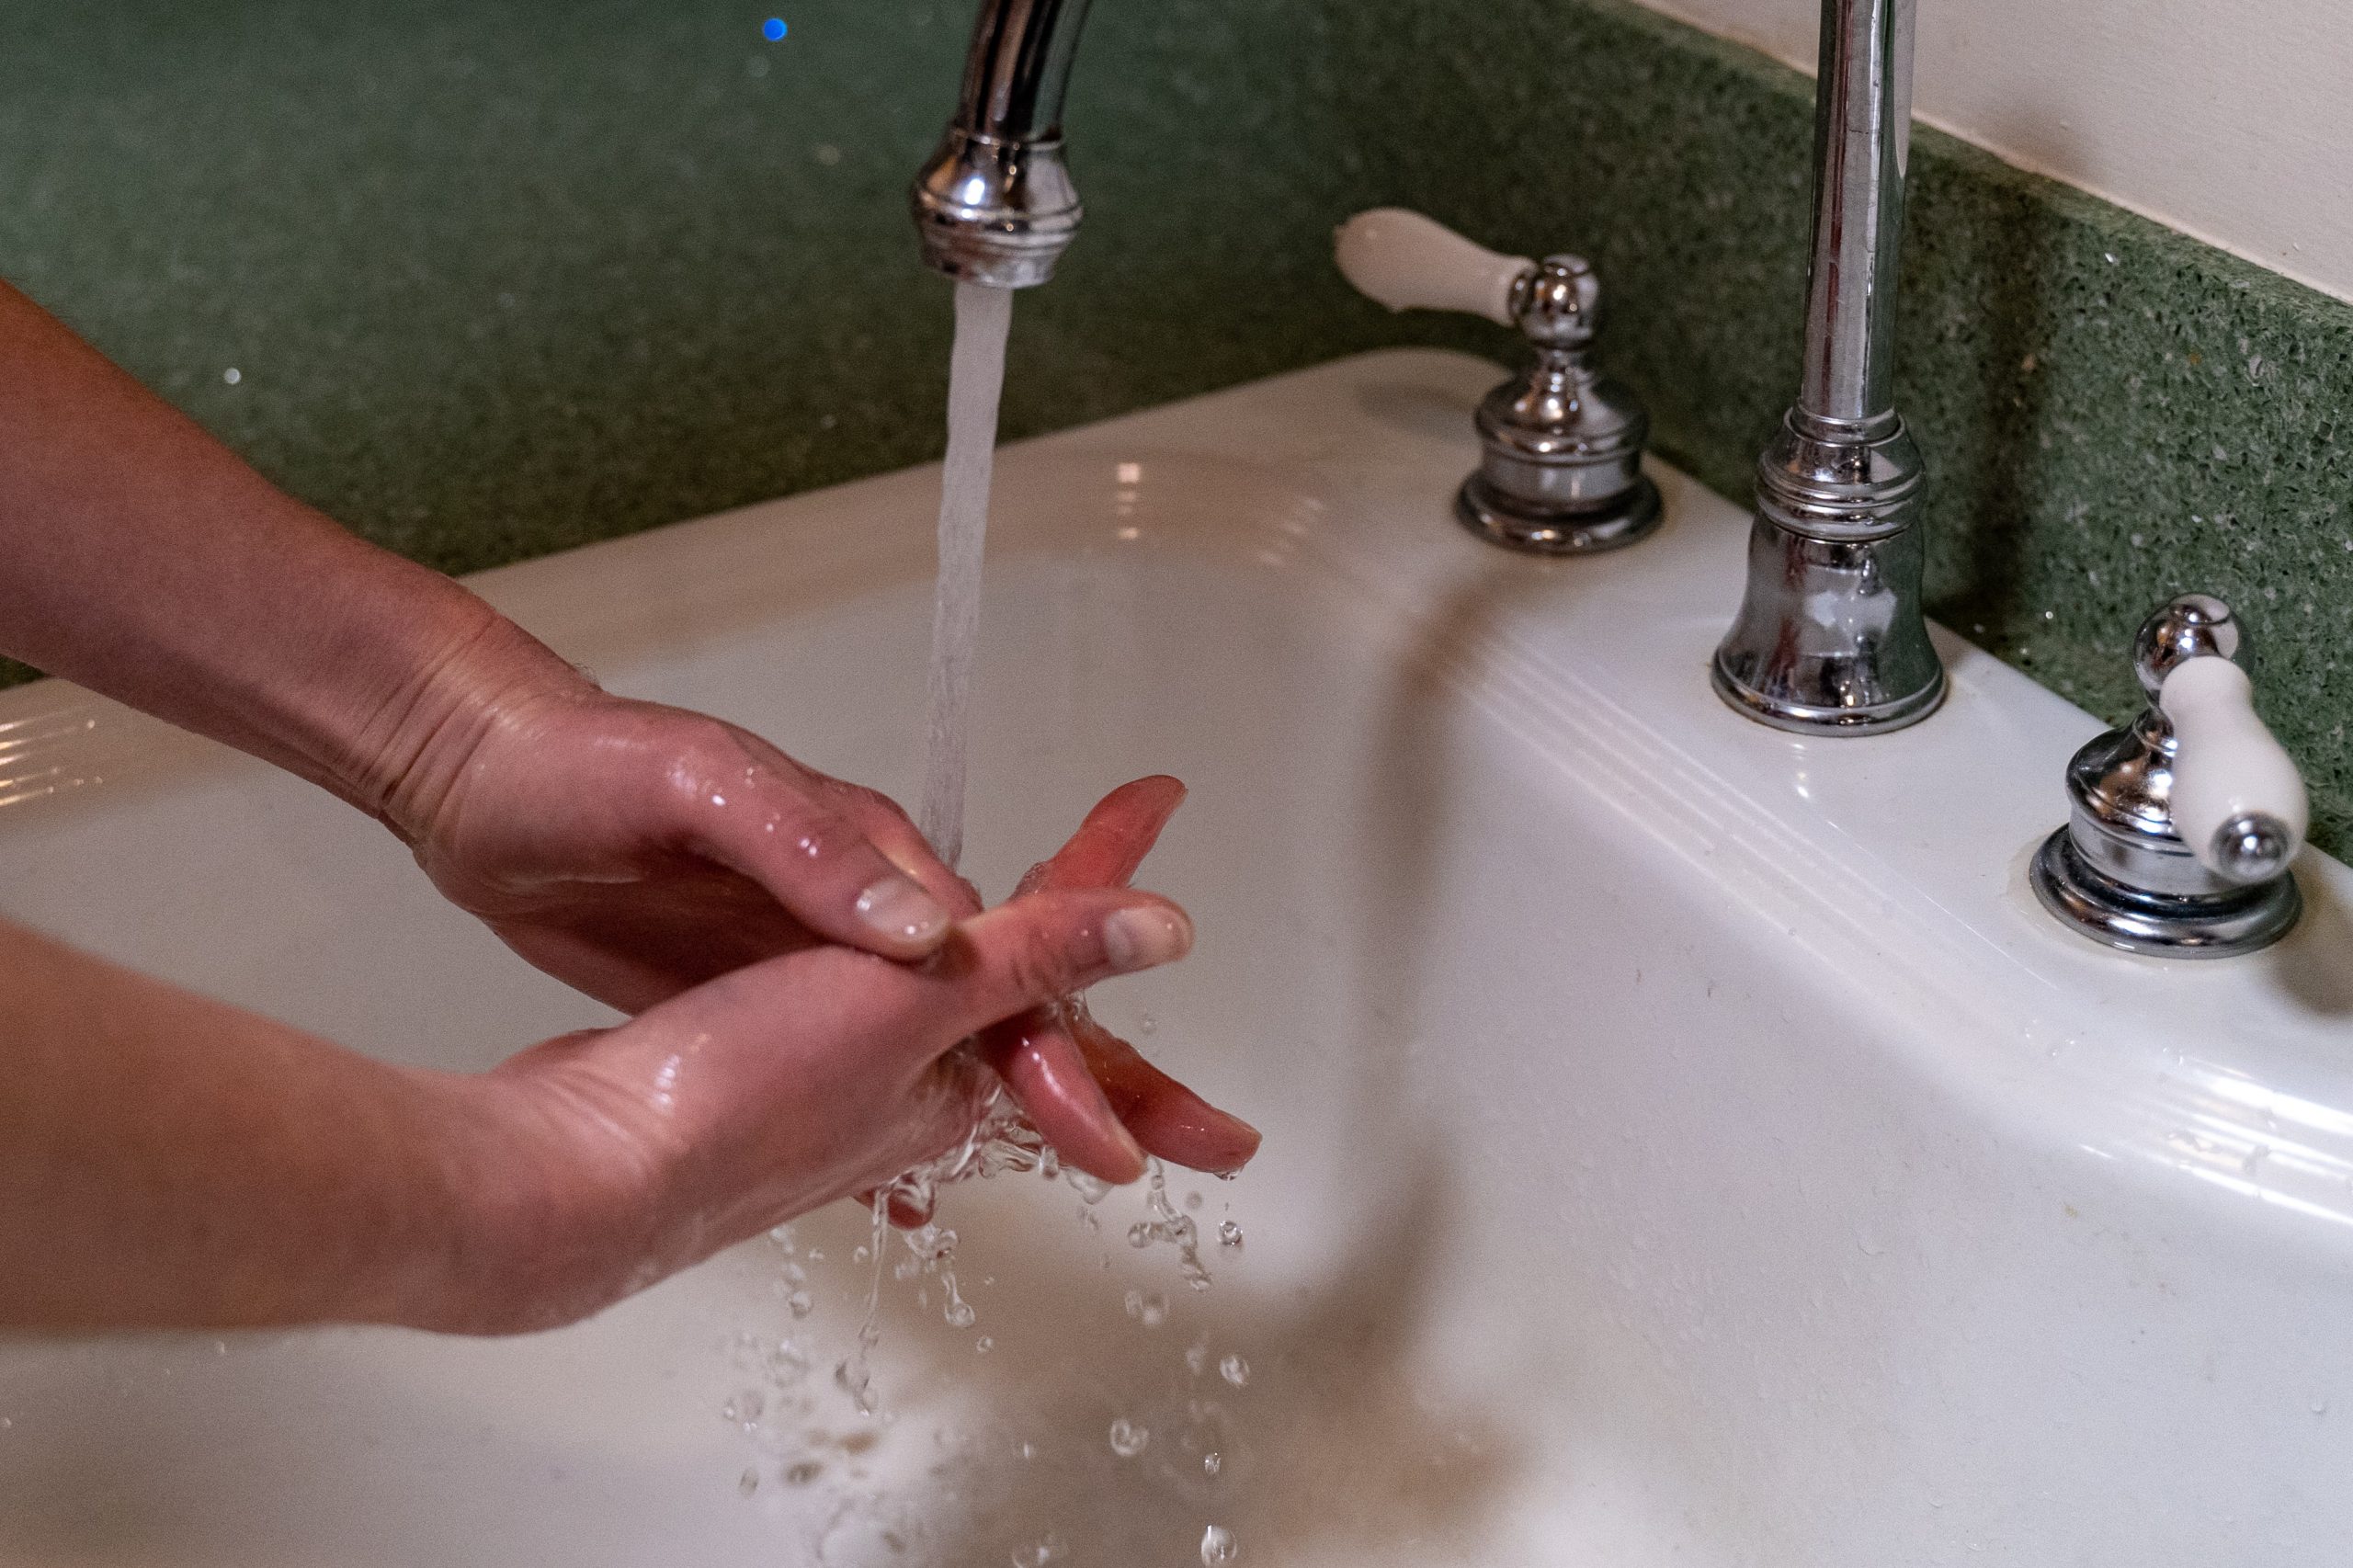 Person washing hands Photo by F Cary Snyder on Unsplash